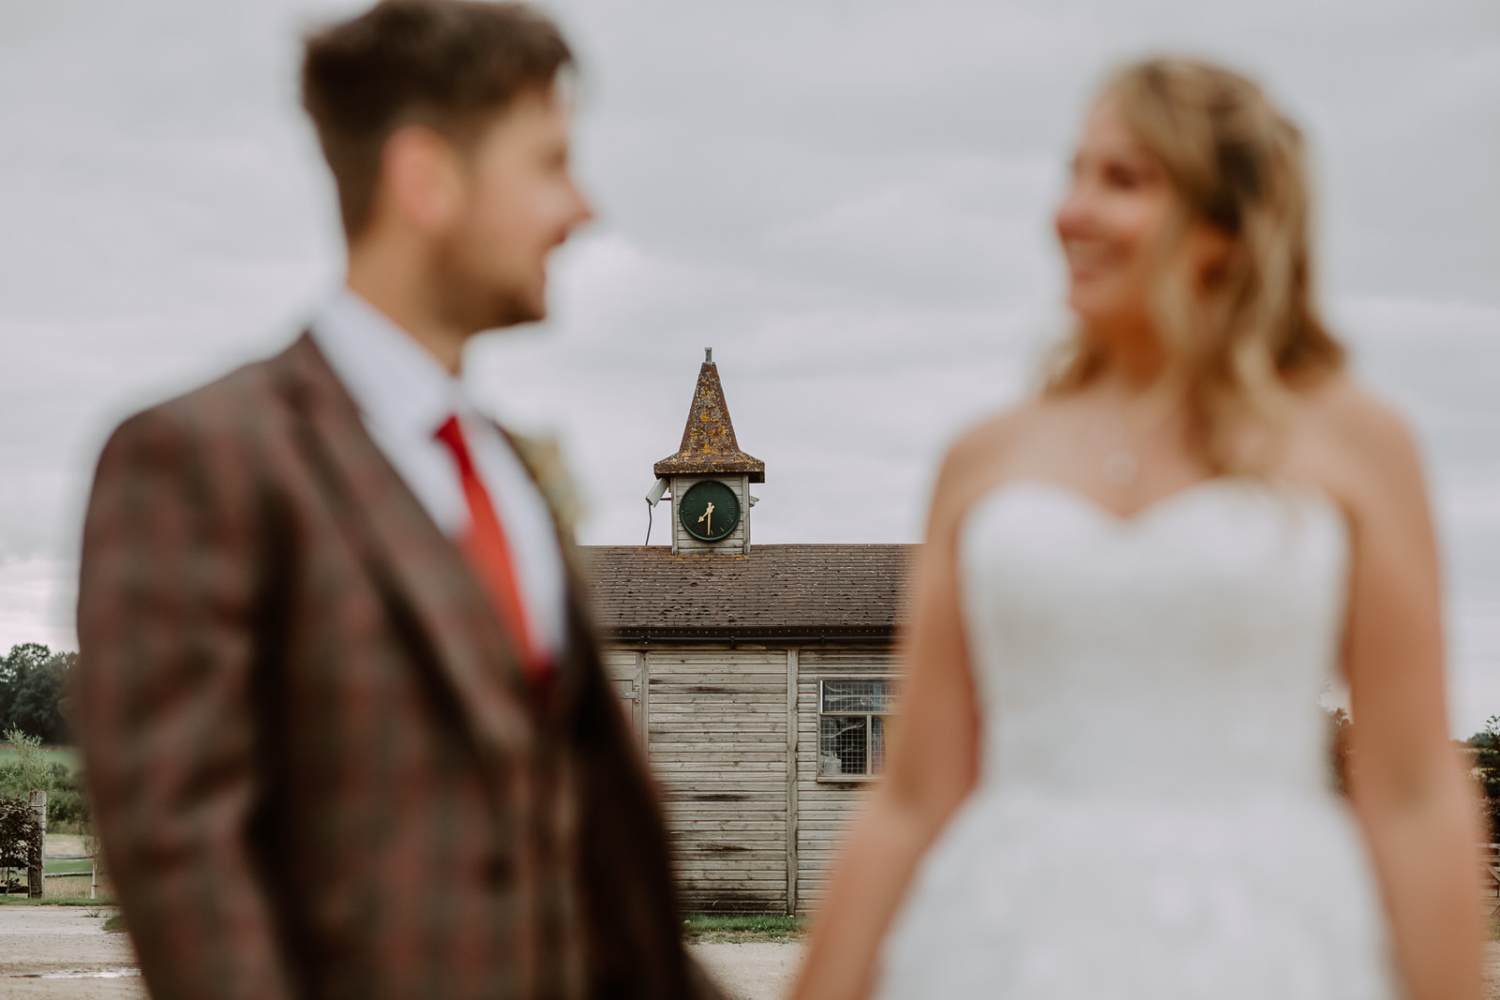 Detailed photo of the clock on the top of the barn with the couple out of the focus placed close to the camera